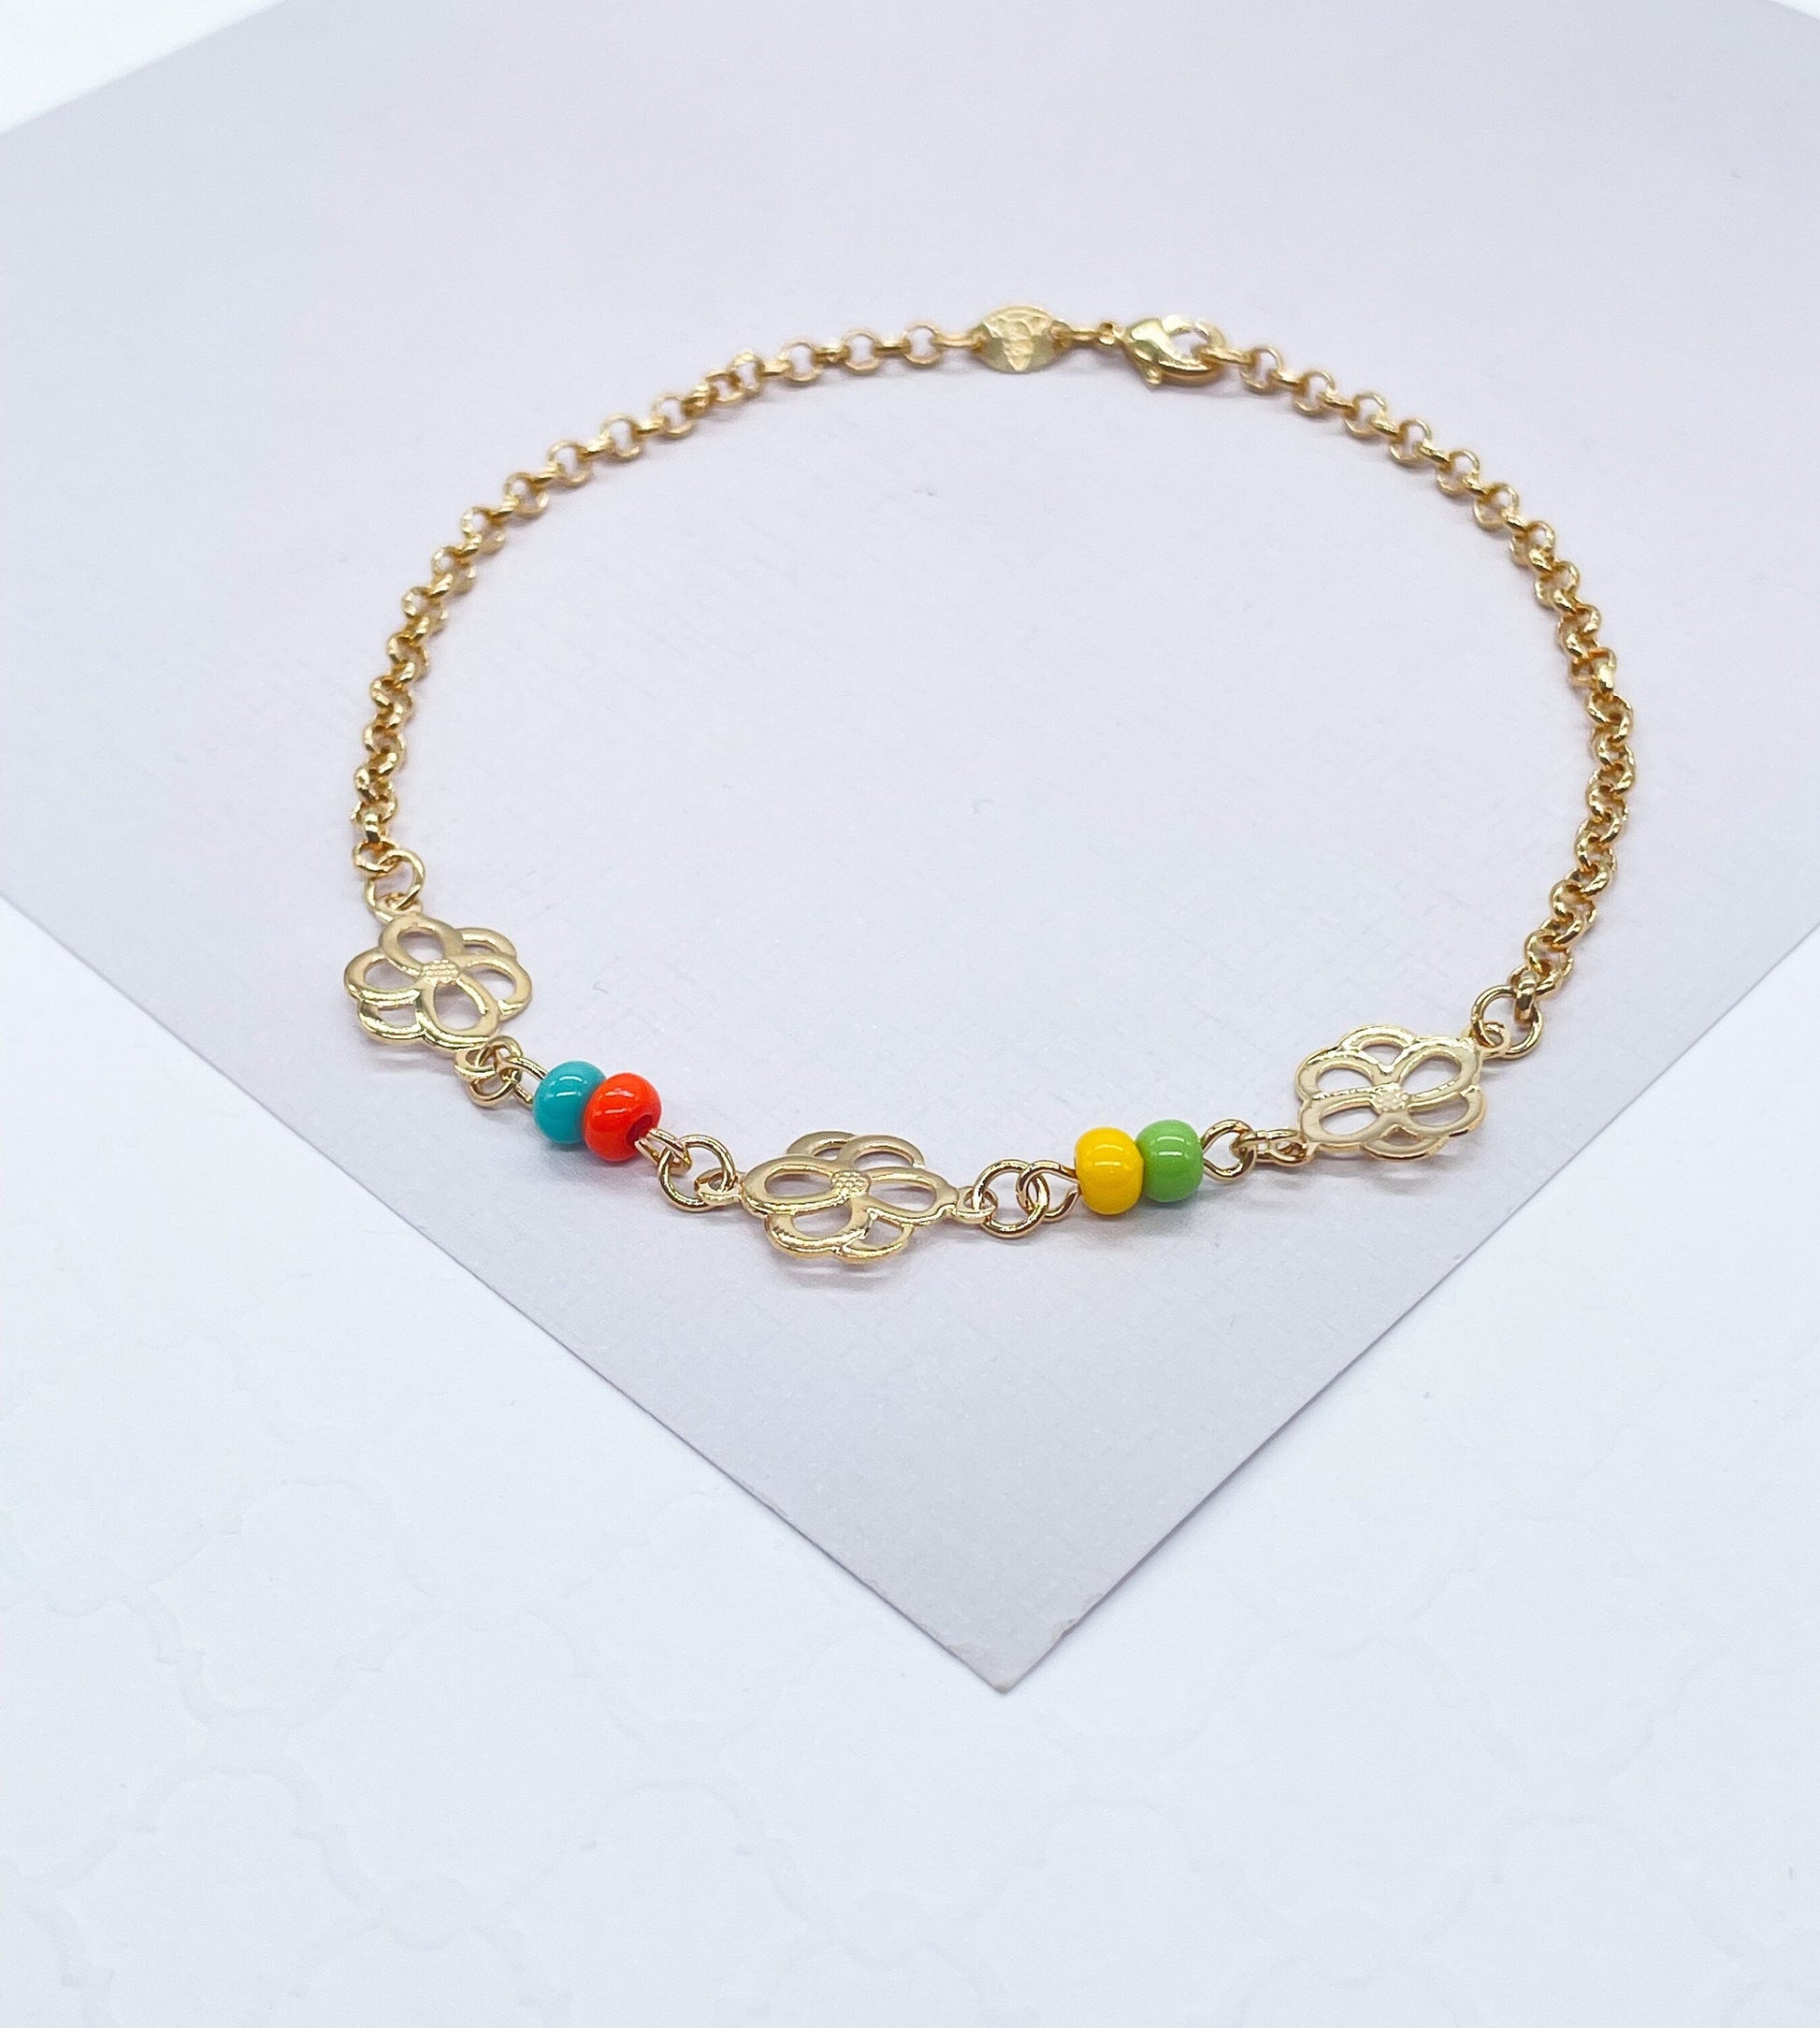 18k Hold Filled Rolo Chain Anklet With Colorful Beads and Flower Charms Attached